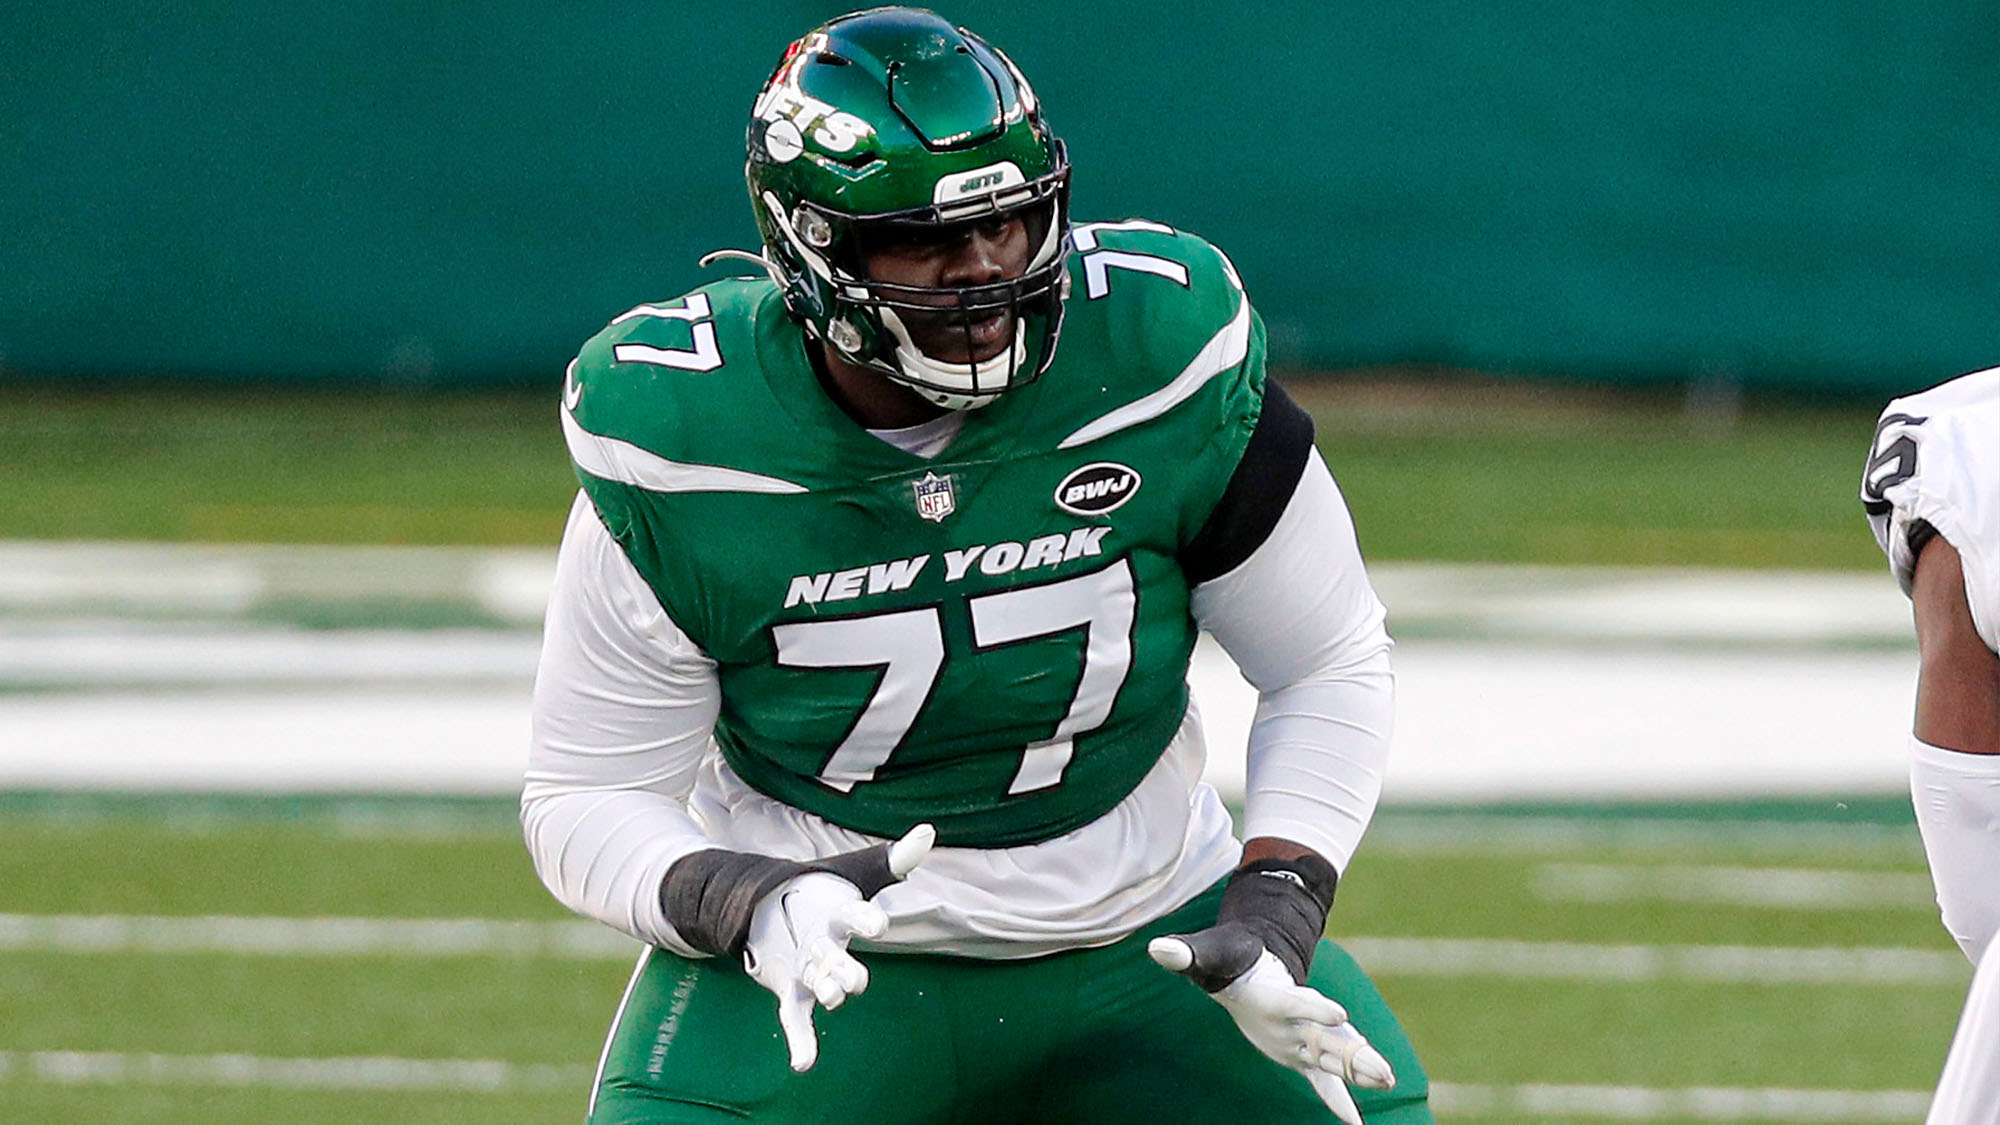 NY Jets tackle Mekhi Becton has something to say to his doubters